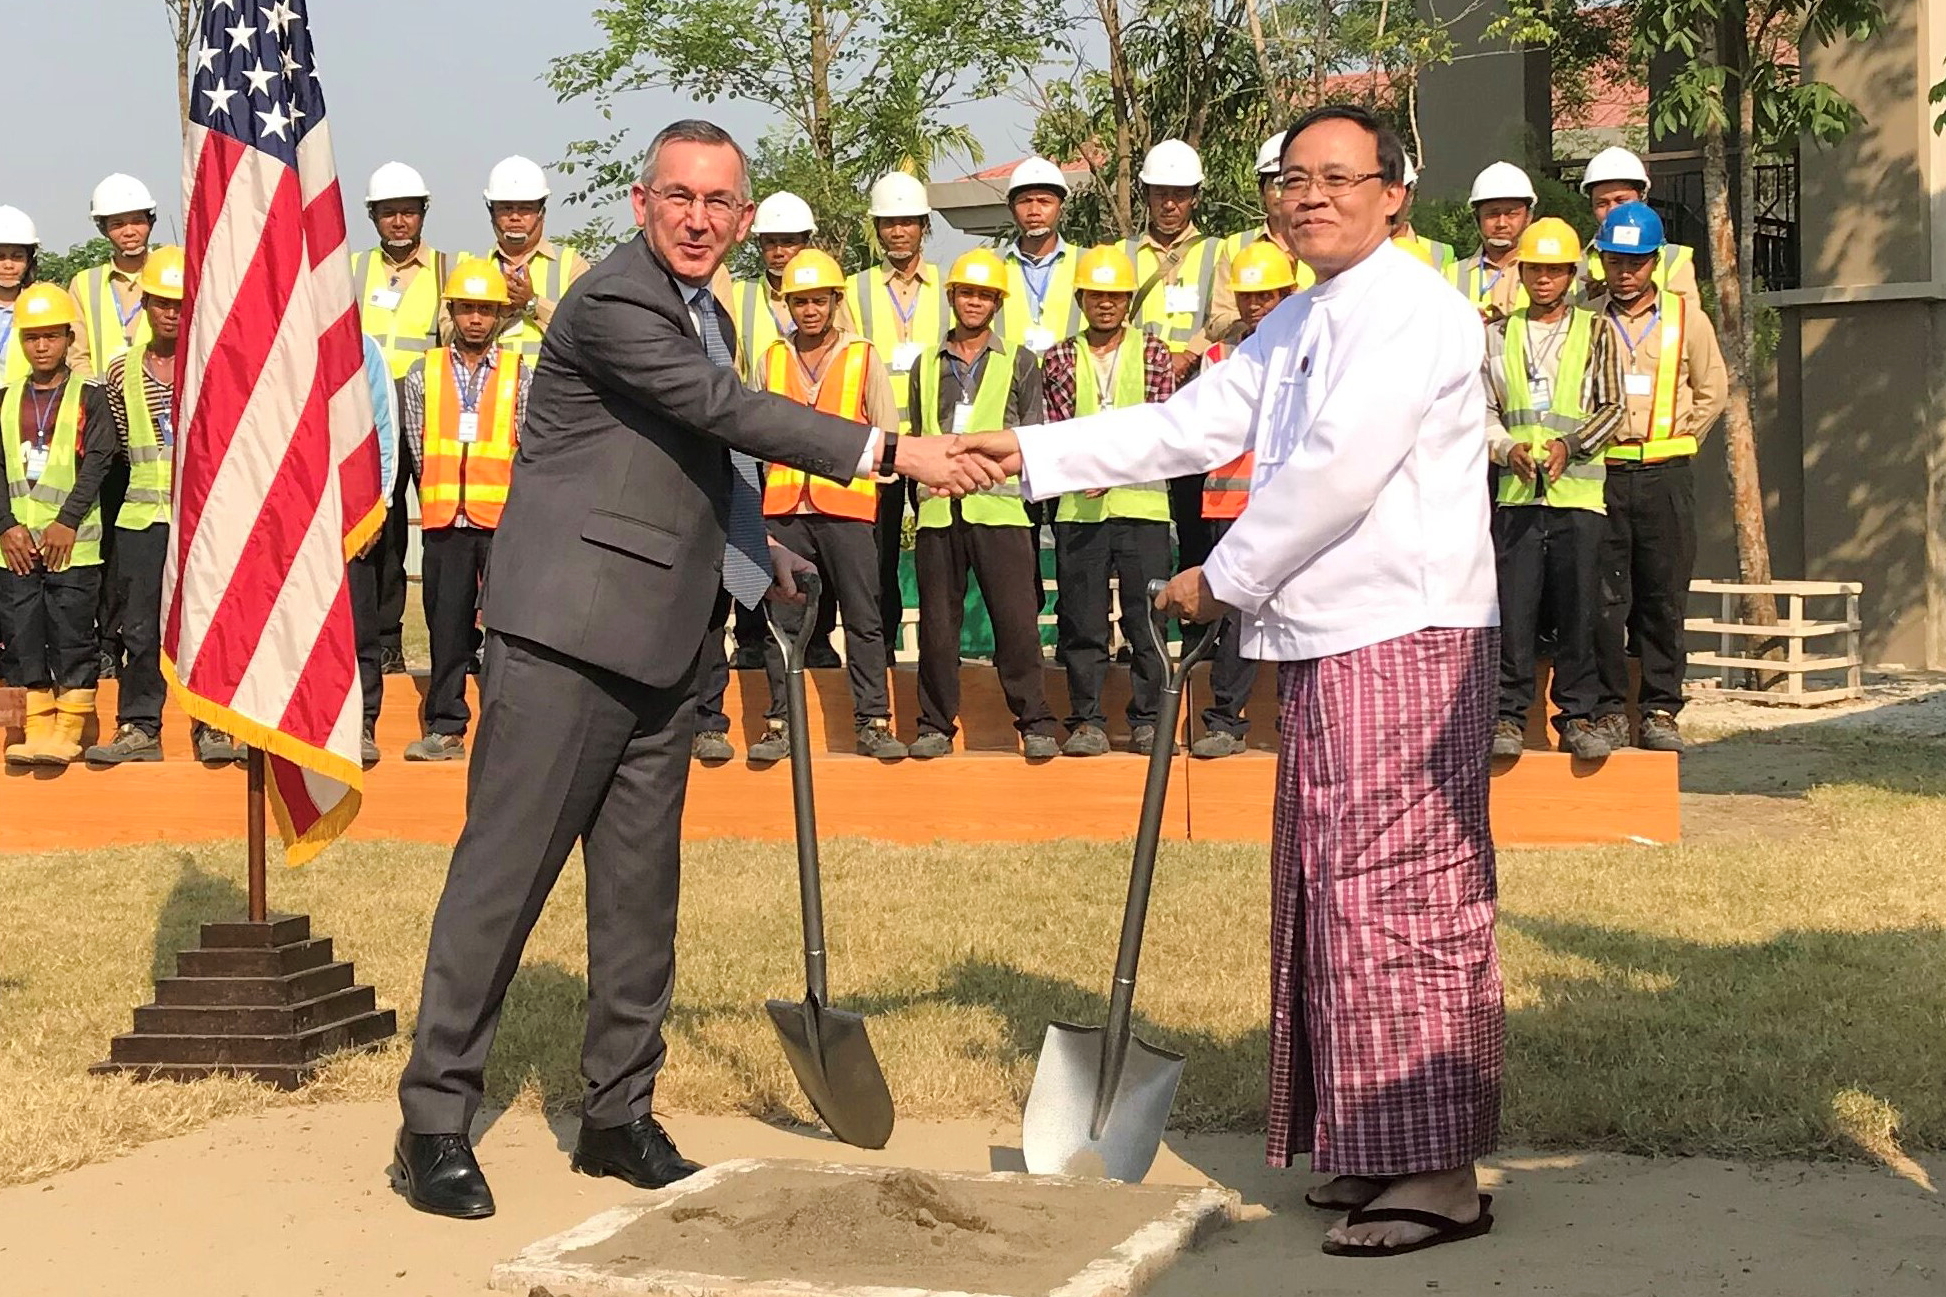 The groundbreaking ceremony took place in the presence of U.S. Ambassador Scot Marciel and Minister U Kyaw Tin, Union Minister for International Cooperation, Myanmar. Click to enlarge.